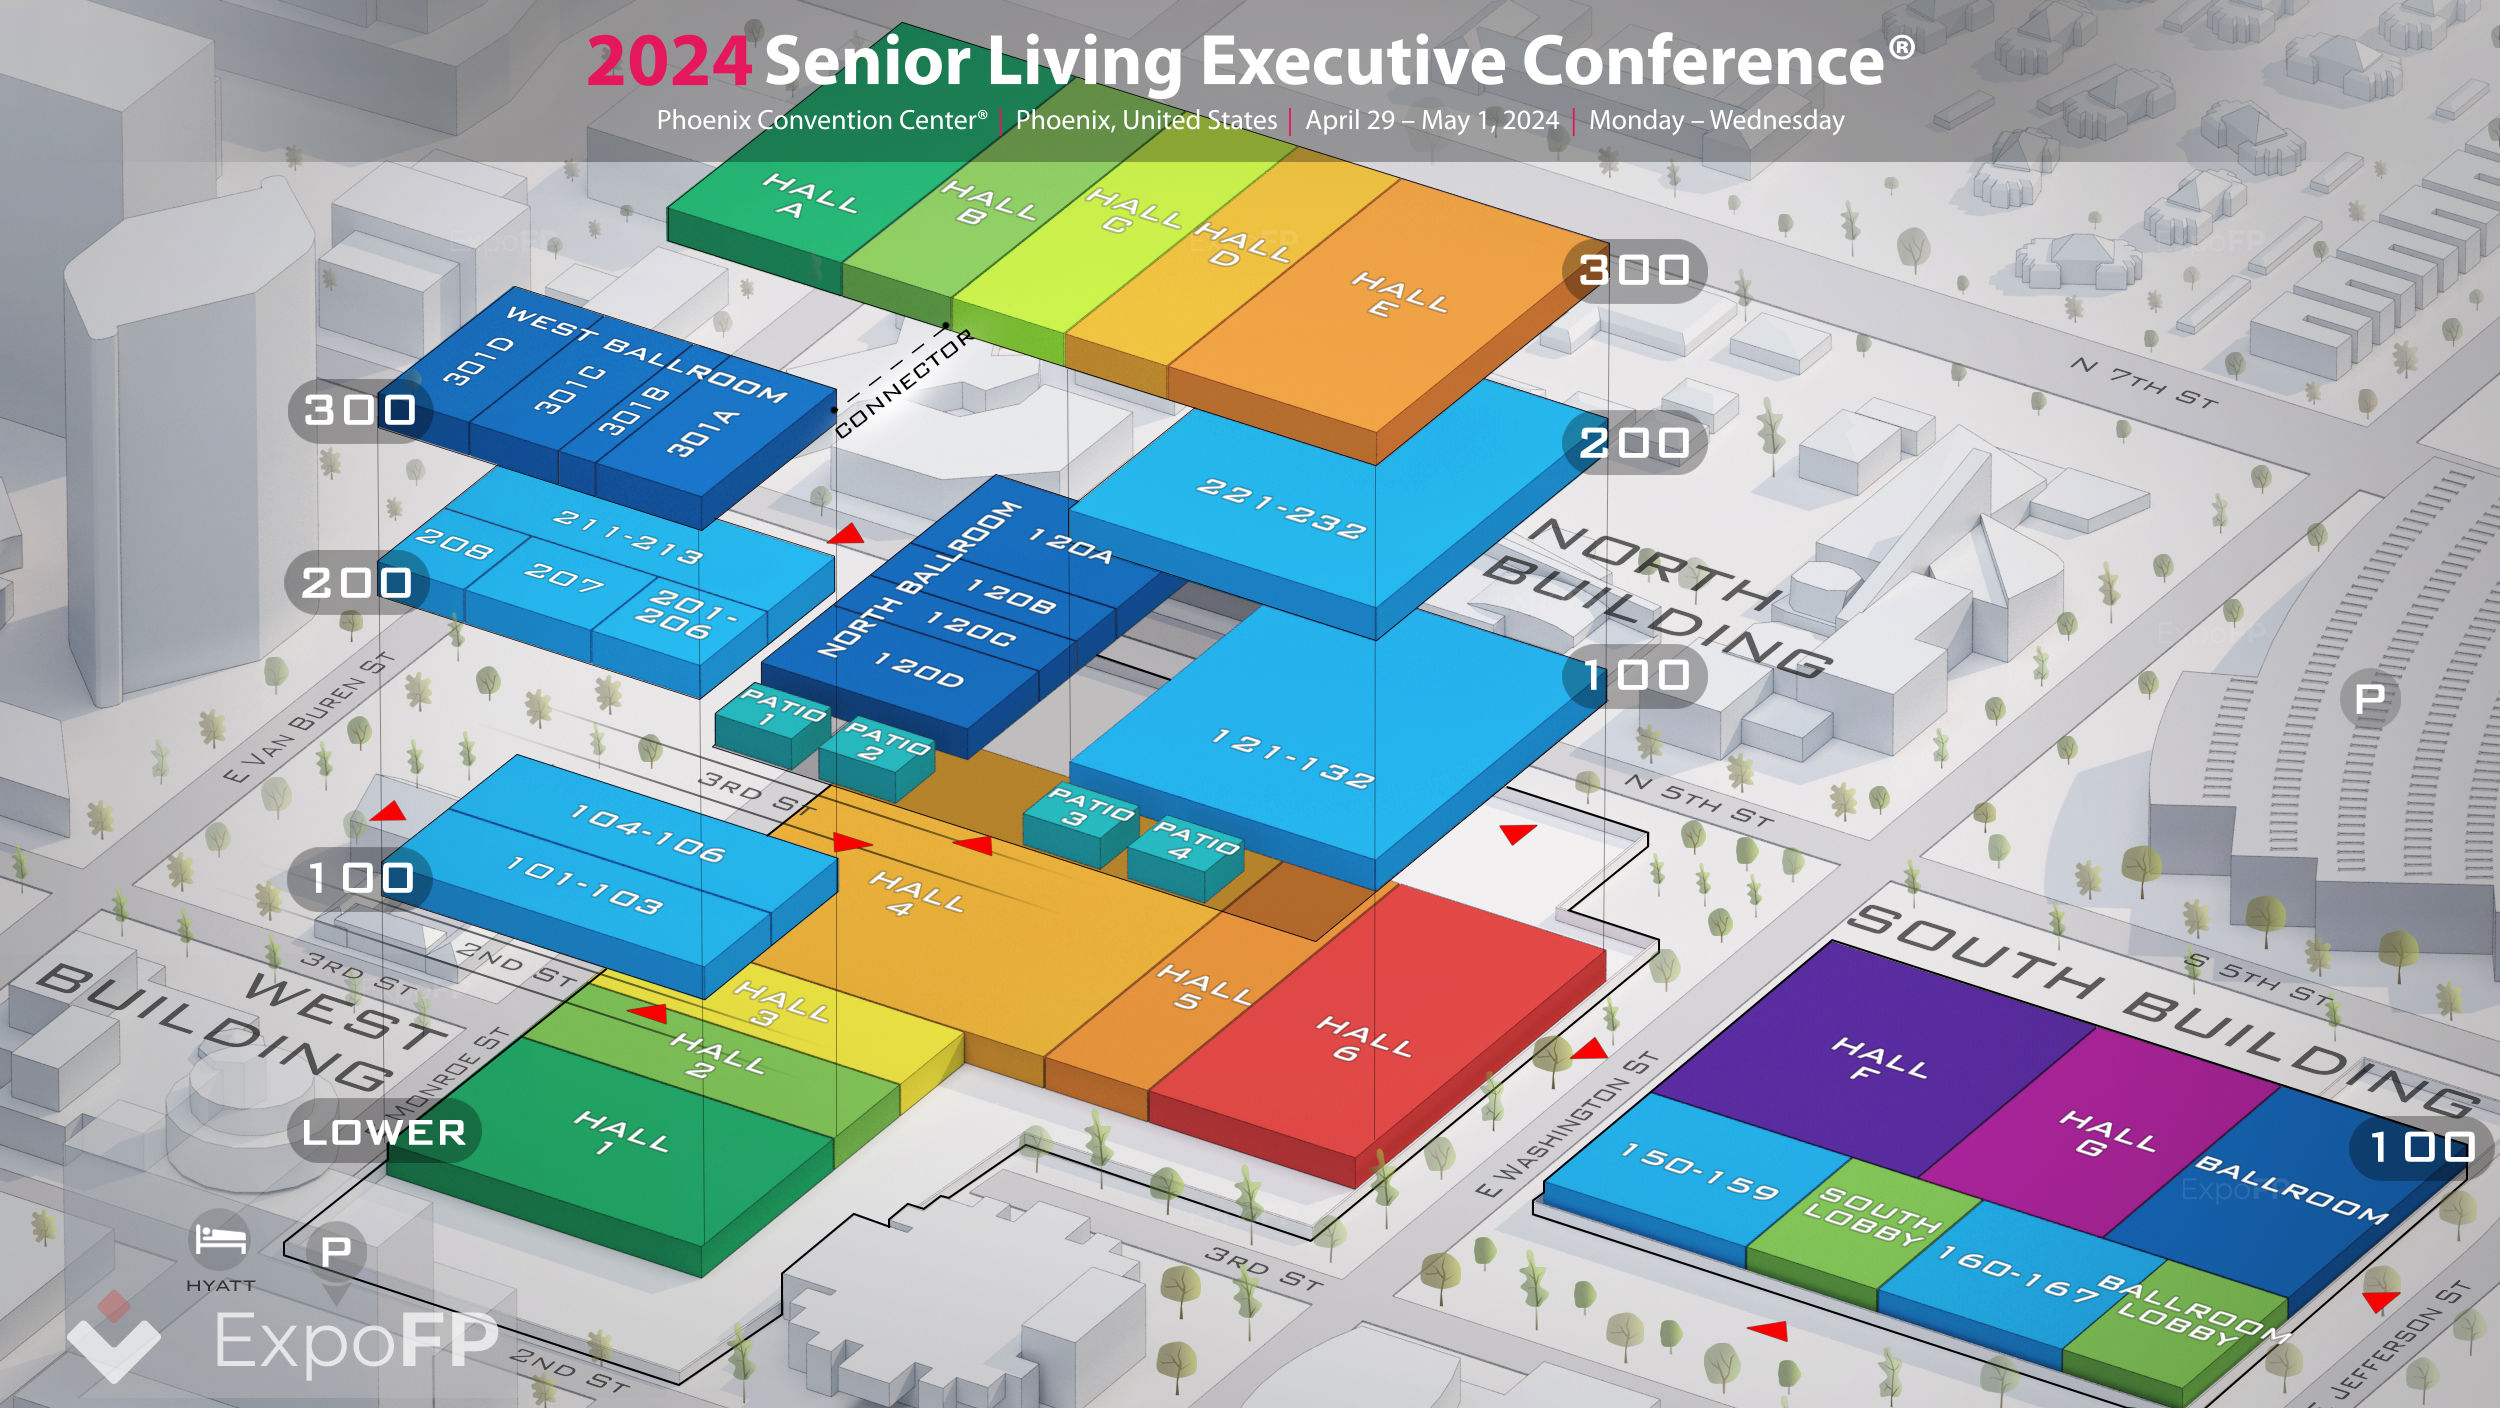 Senior Living Executive Conference 2024 in Phoenix Convention Center